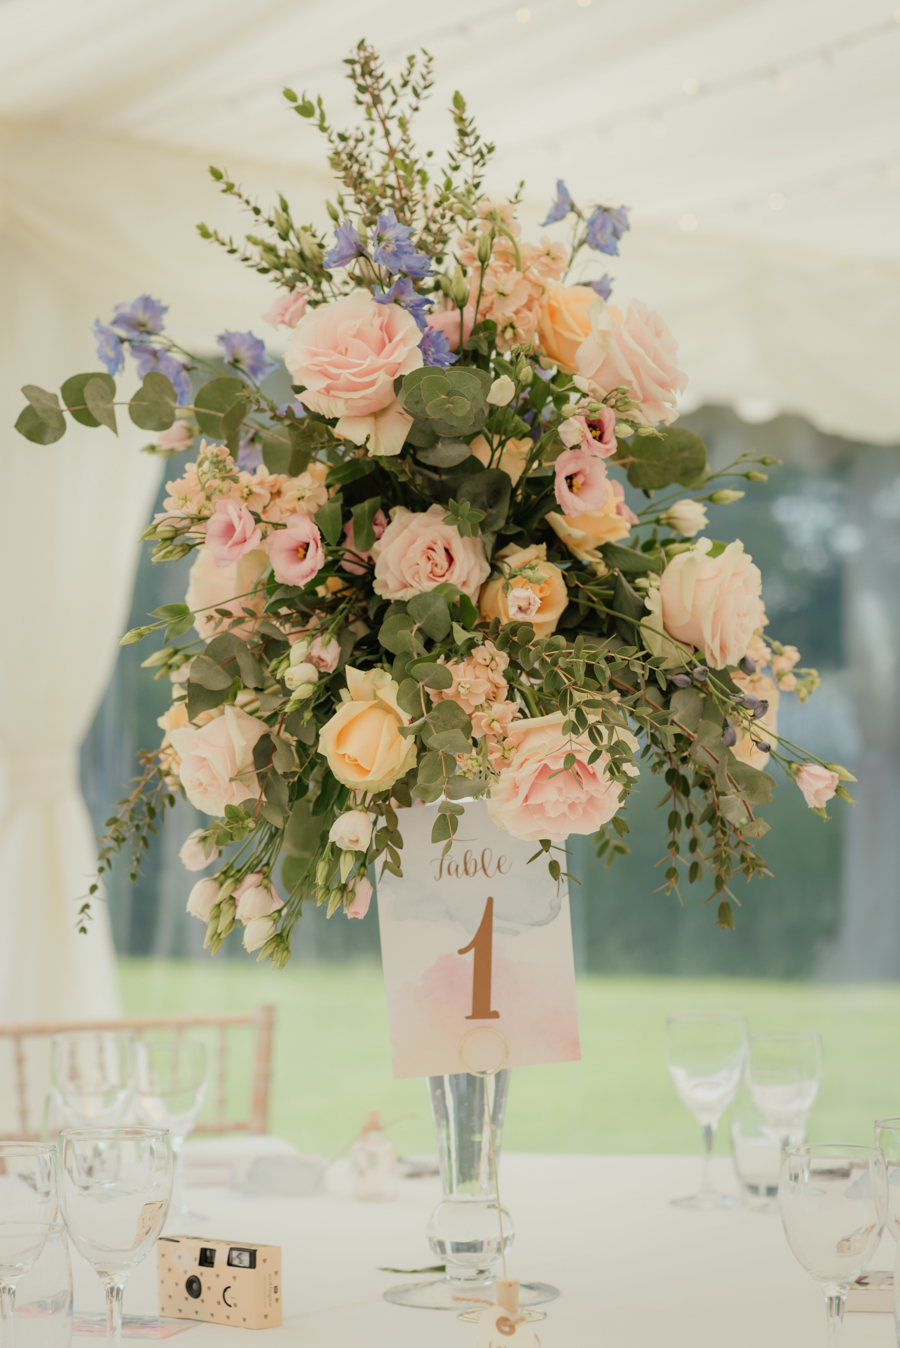 Stacey and Alex’s blush wedding at Ardington House, with Benjamin Wetherall Photography